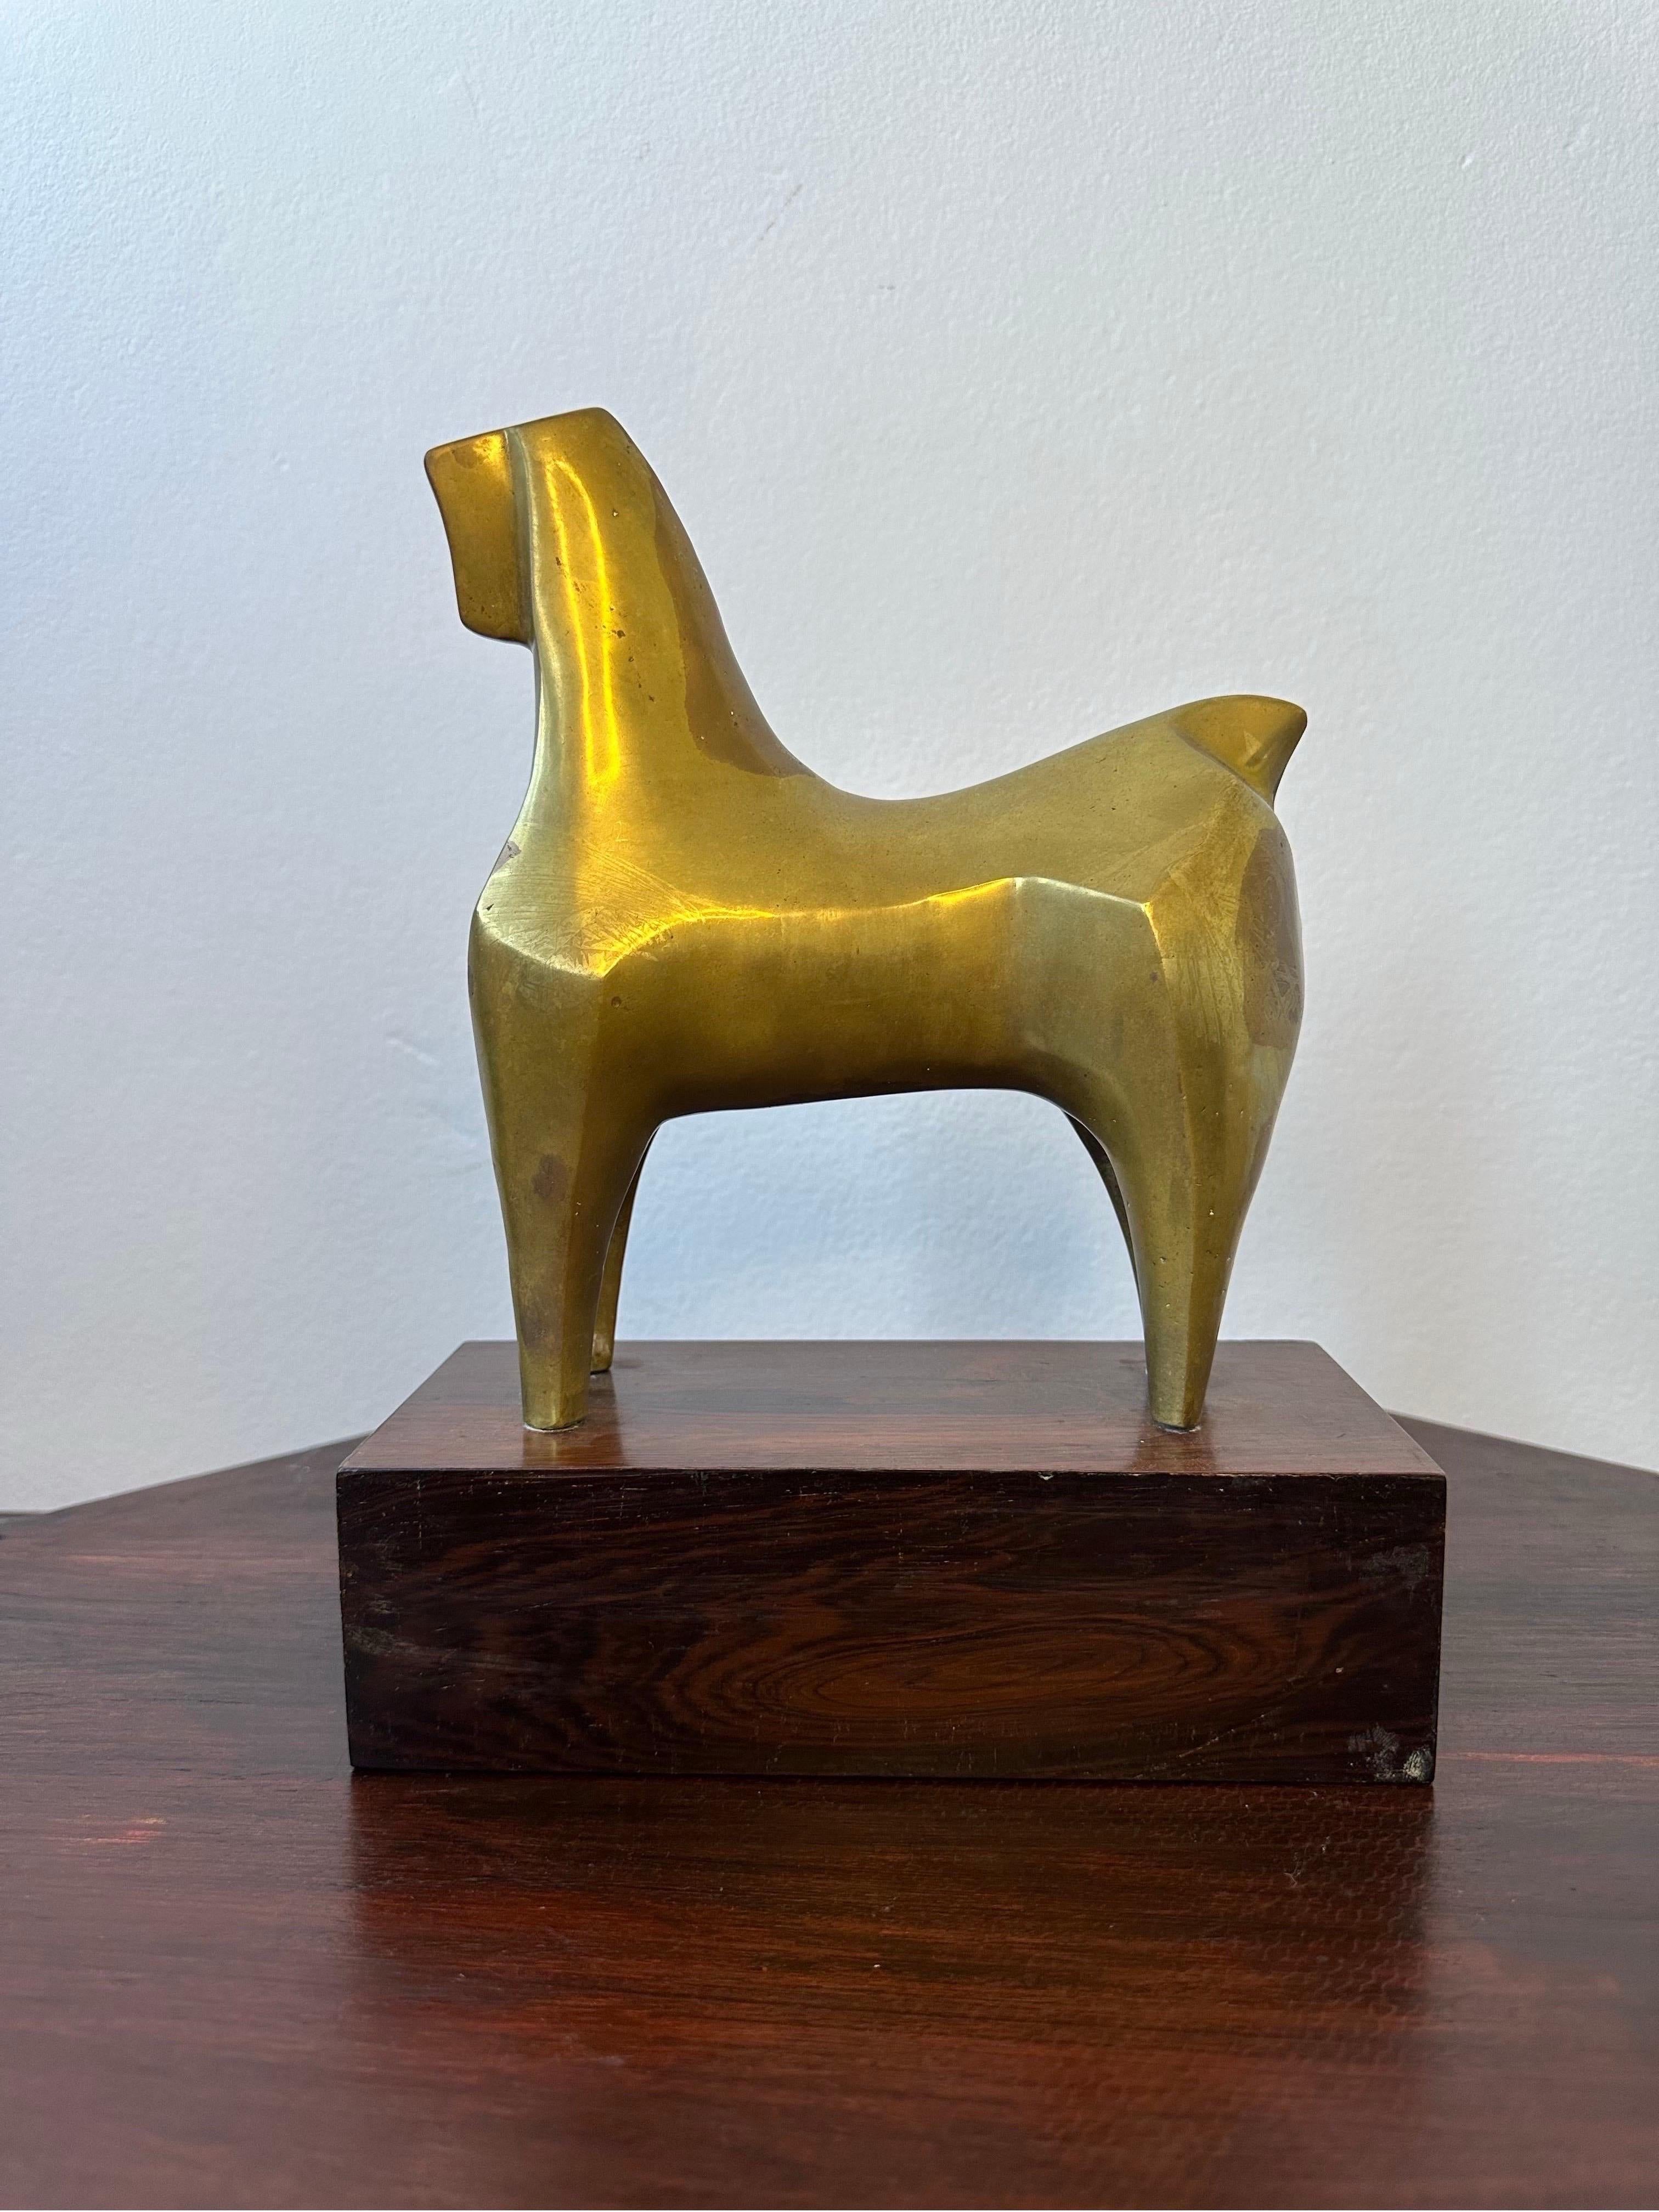 Brazilian modernist bronze horse sculpture standing on a Rosewood base circa 1960s.  The hollow core geometric bronze horse is a testament to the modernist arts movement of Brazil during the 1960s.  The bronze horse stands on beautiful Jacaranda